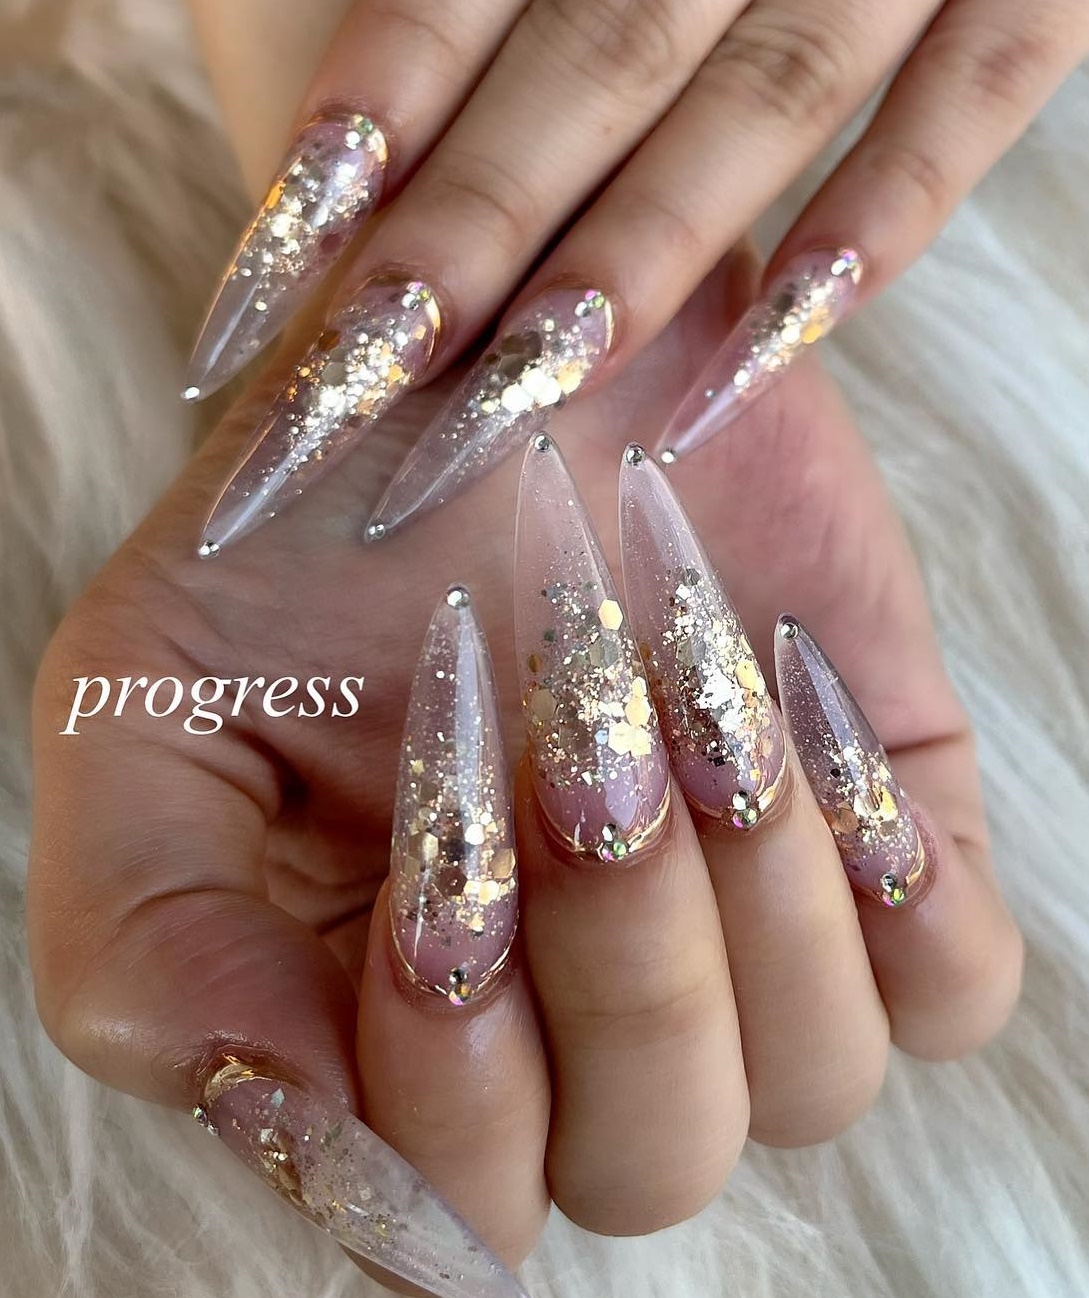 30 Clear Nail Designs to Copy in 2023 - The Trend Spotter